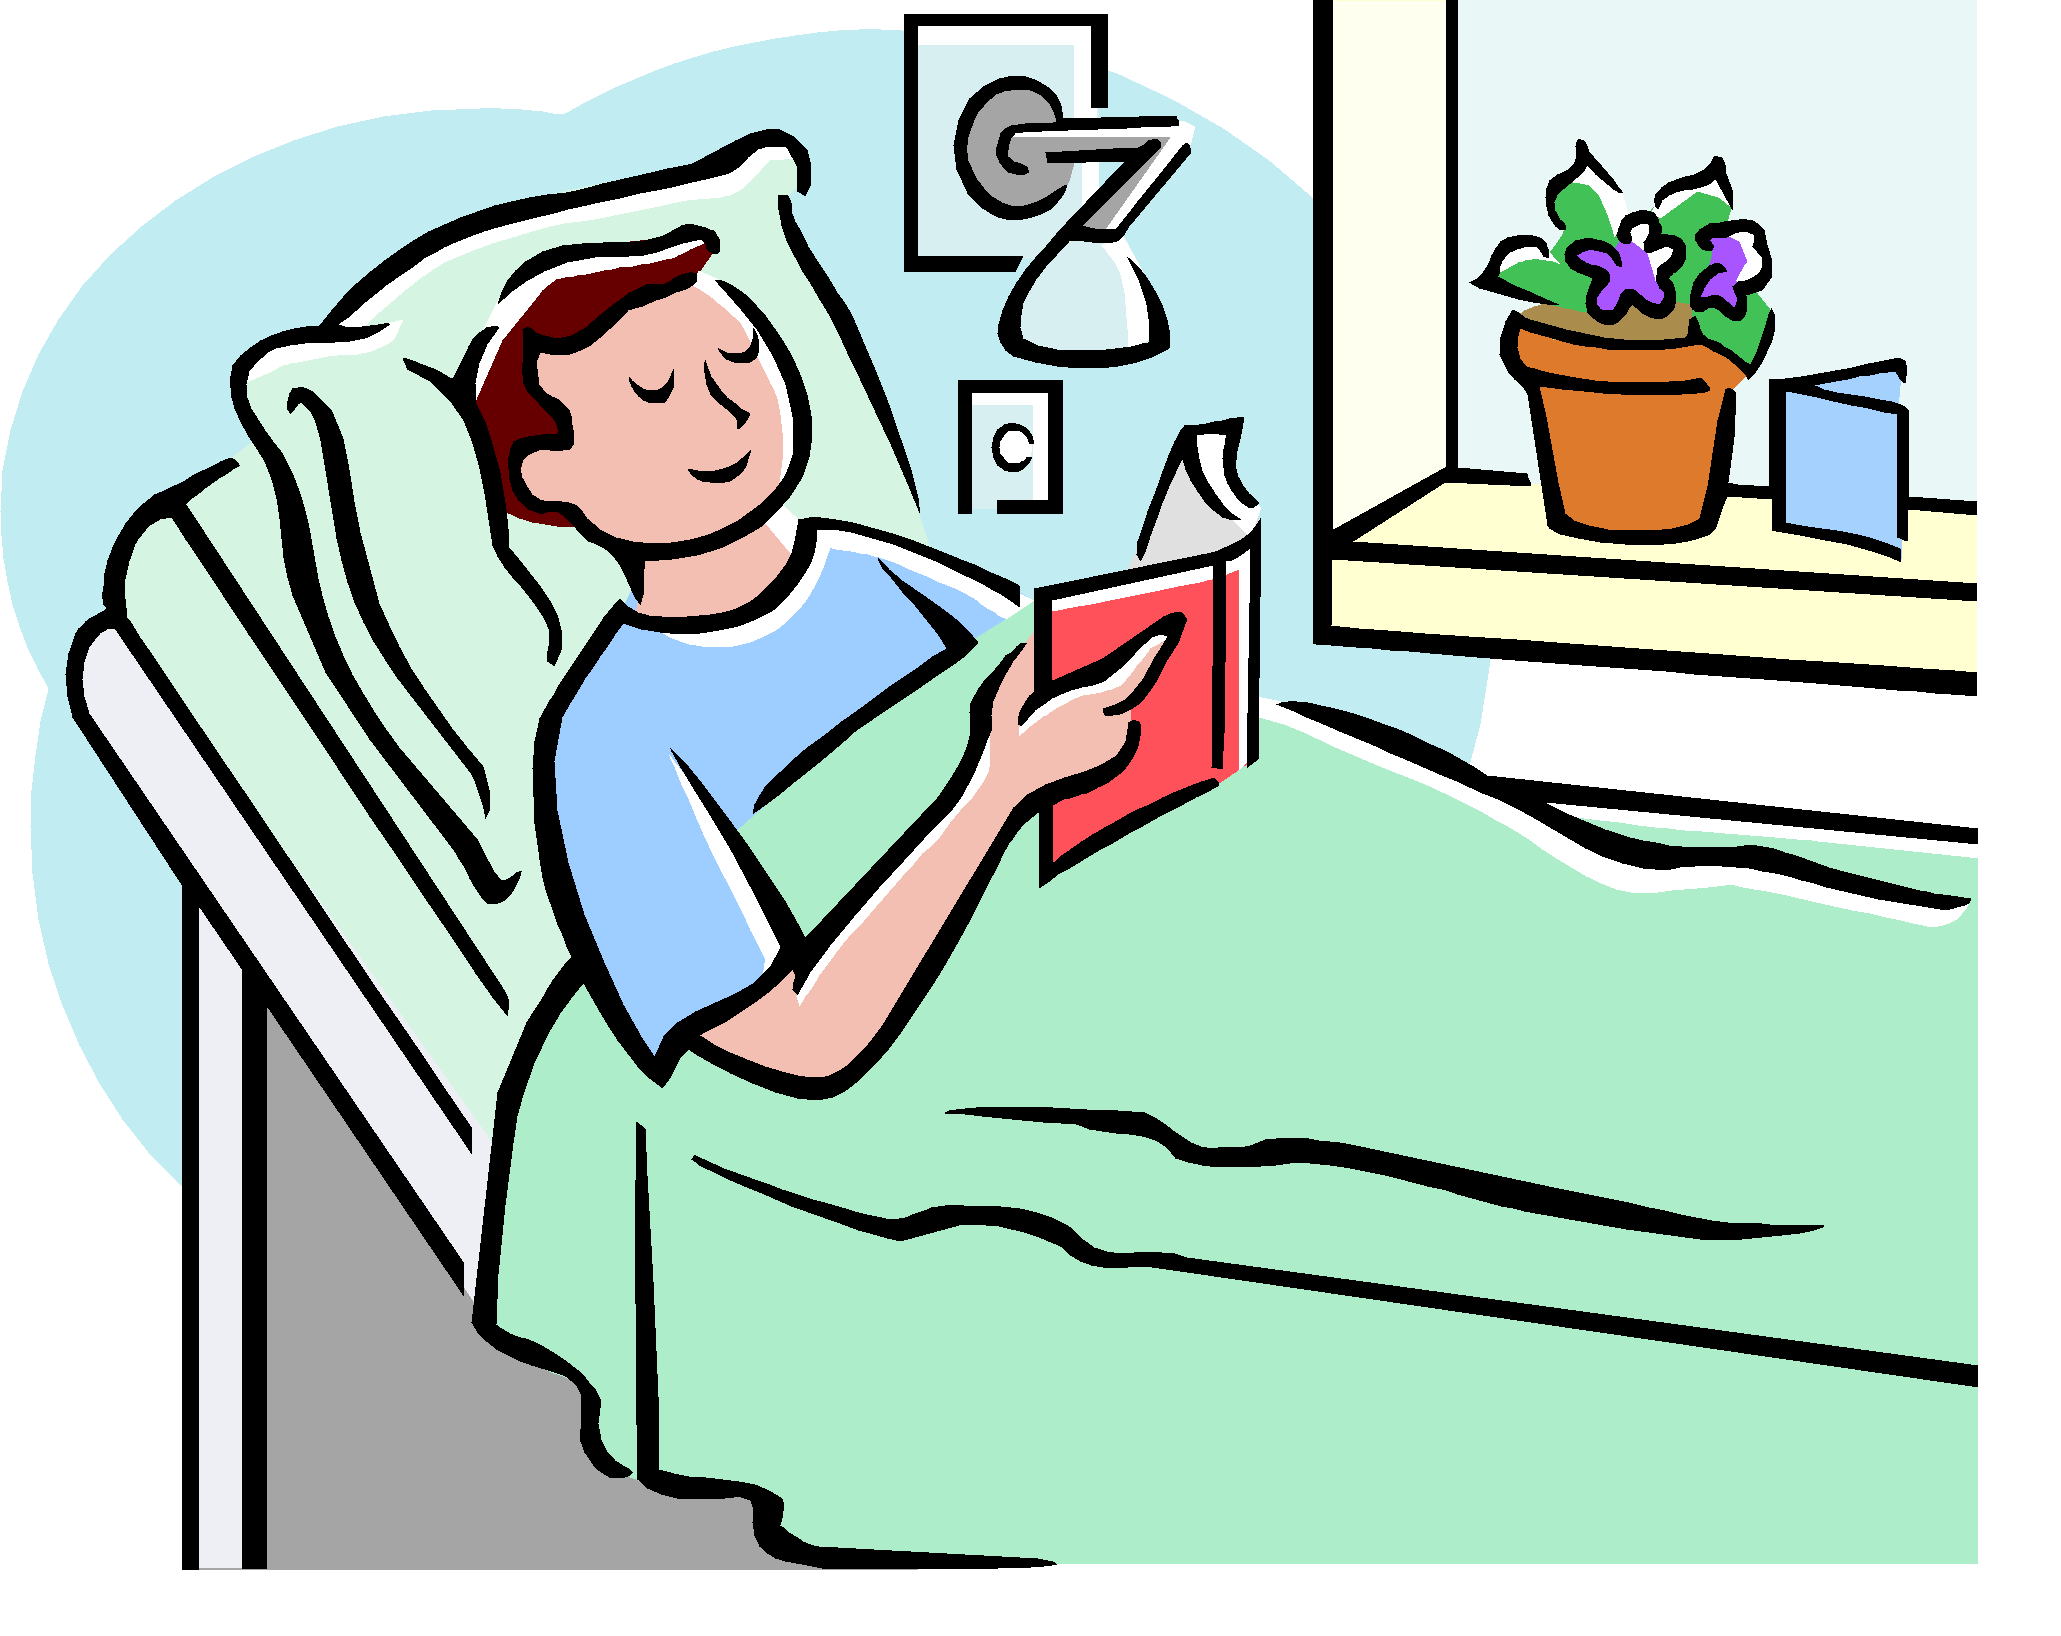 Patient clipart hospital bed, Patient hospital bed Transparent FREE for